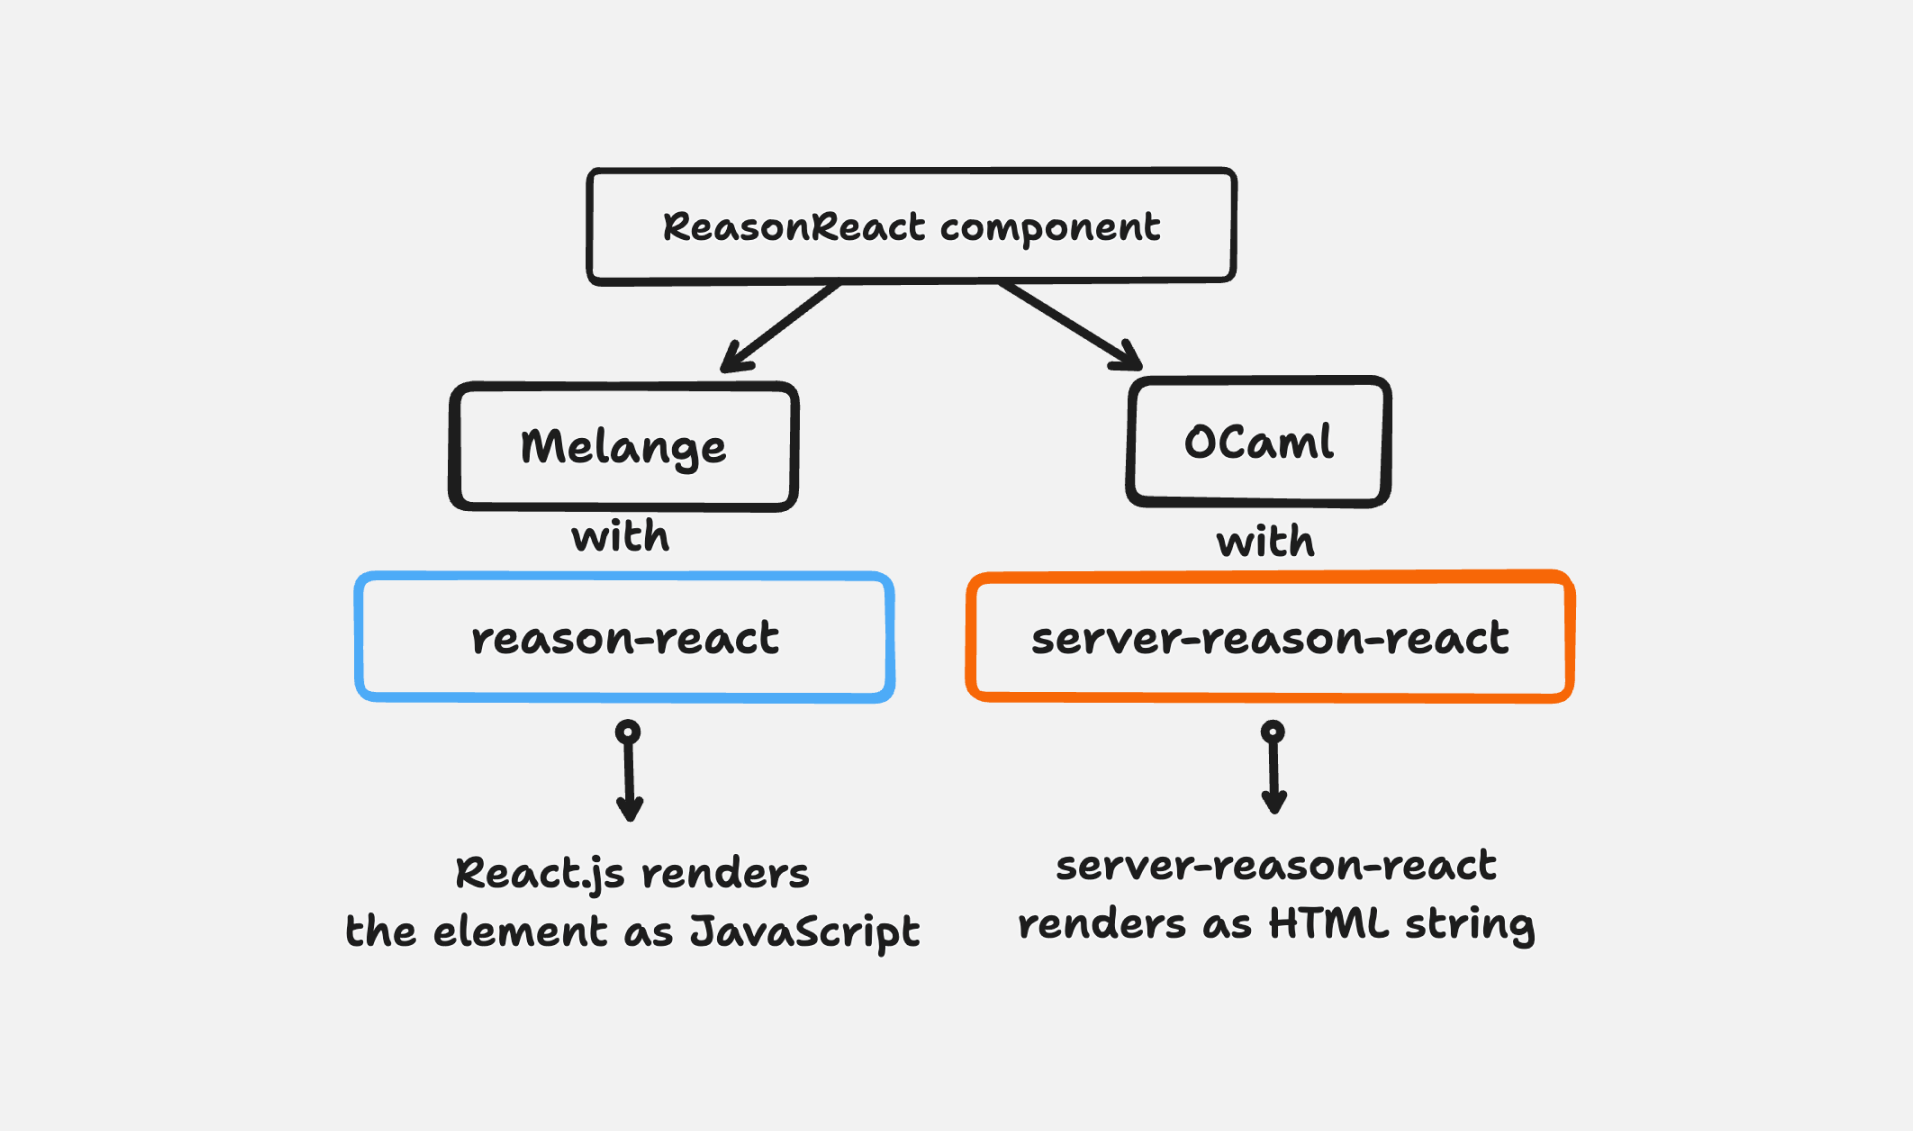 Example of a react component rendered with both reason-react and server-reason-react